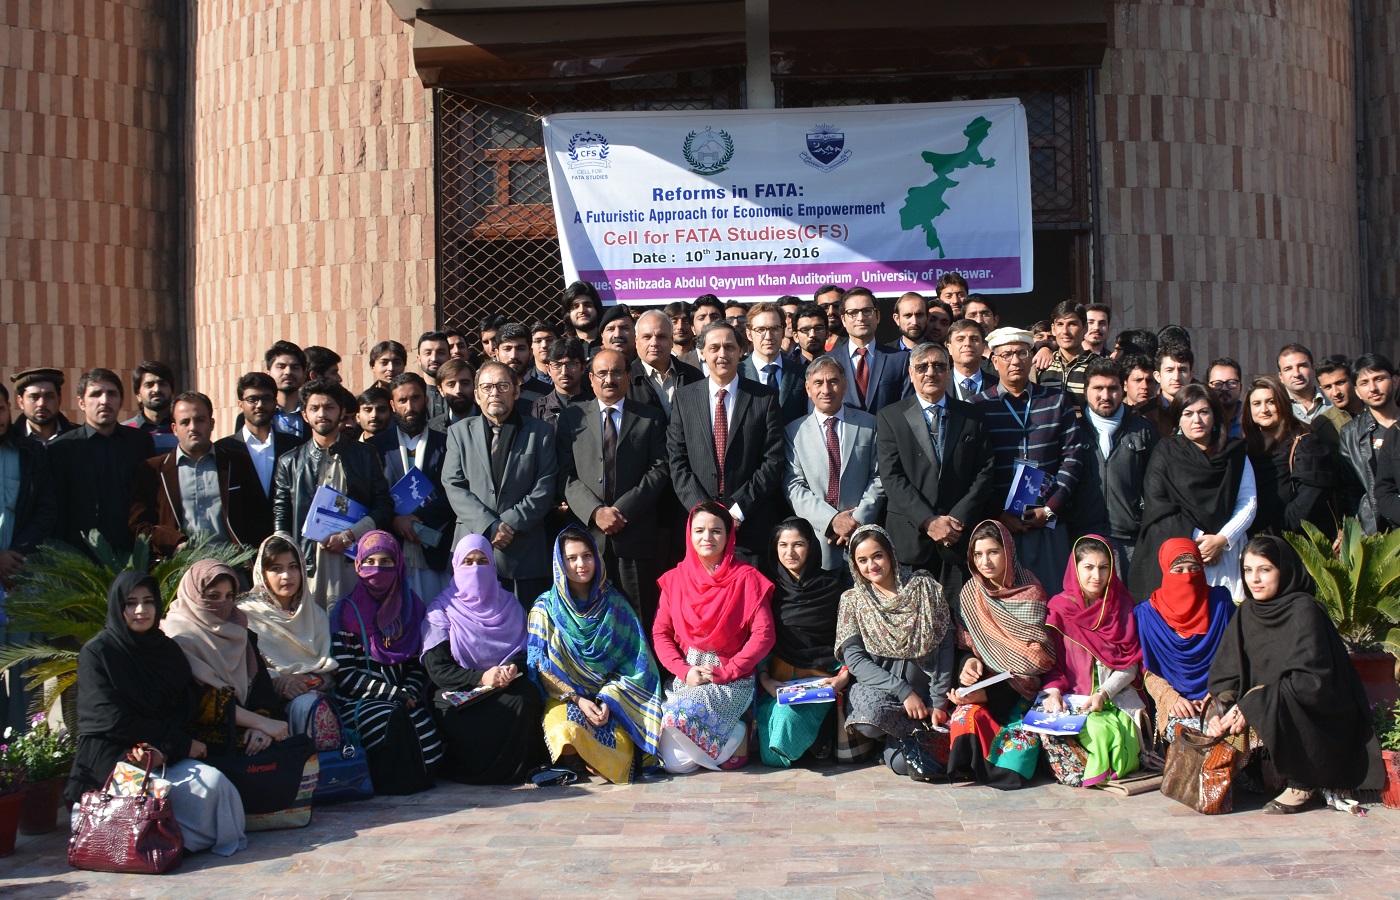 Secretary Safron Shehzad Arbab and VC UoP Prof. Dr. Muhammad Rasul Jan in group photo with particpants of workshop on FATA reforms at the University of Peshawar